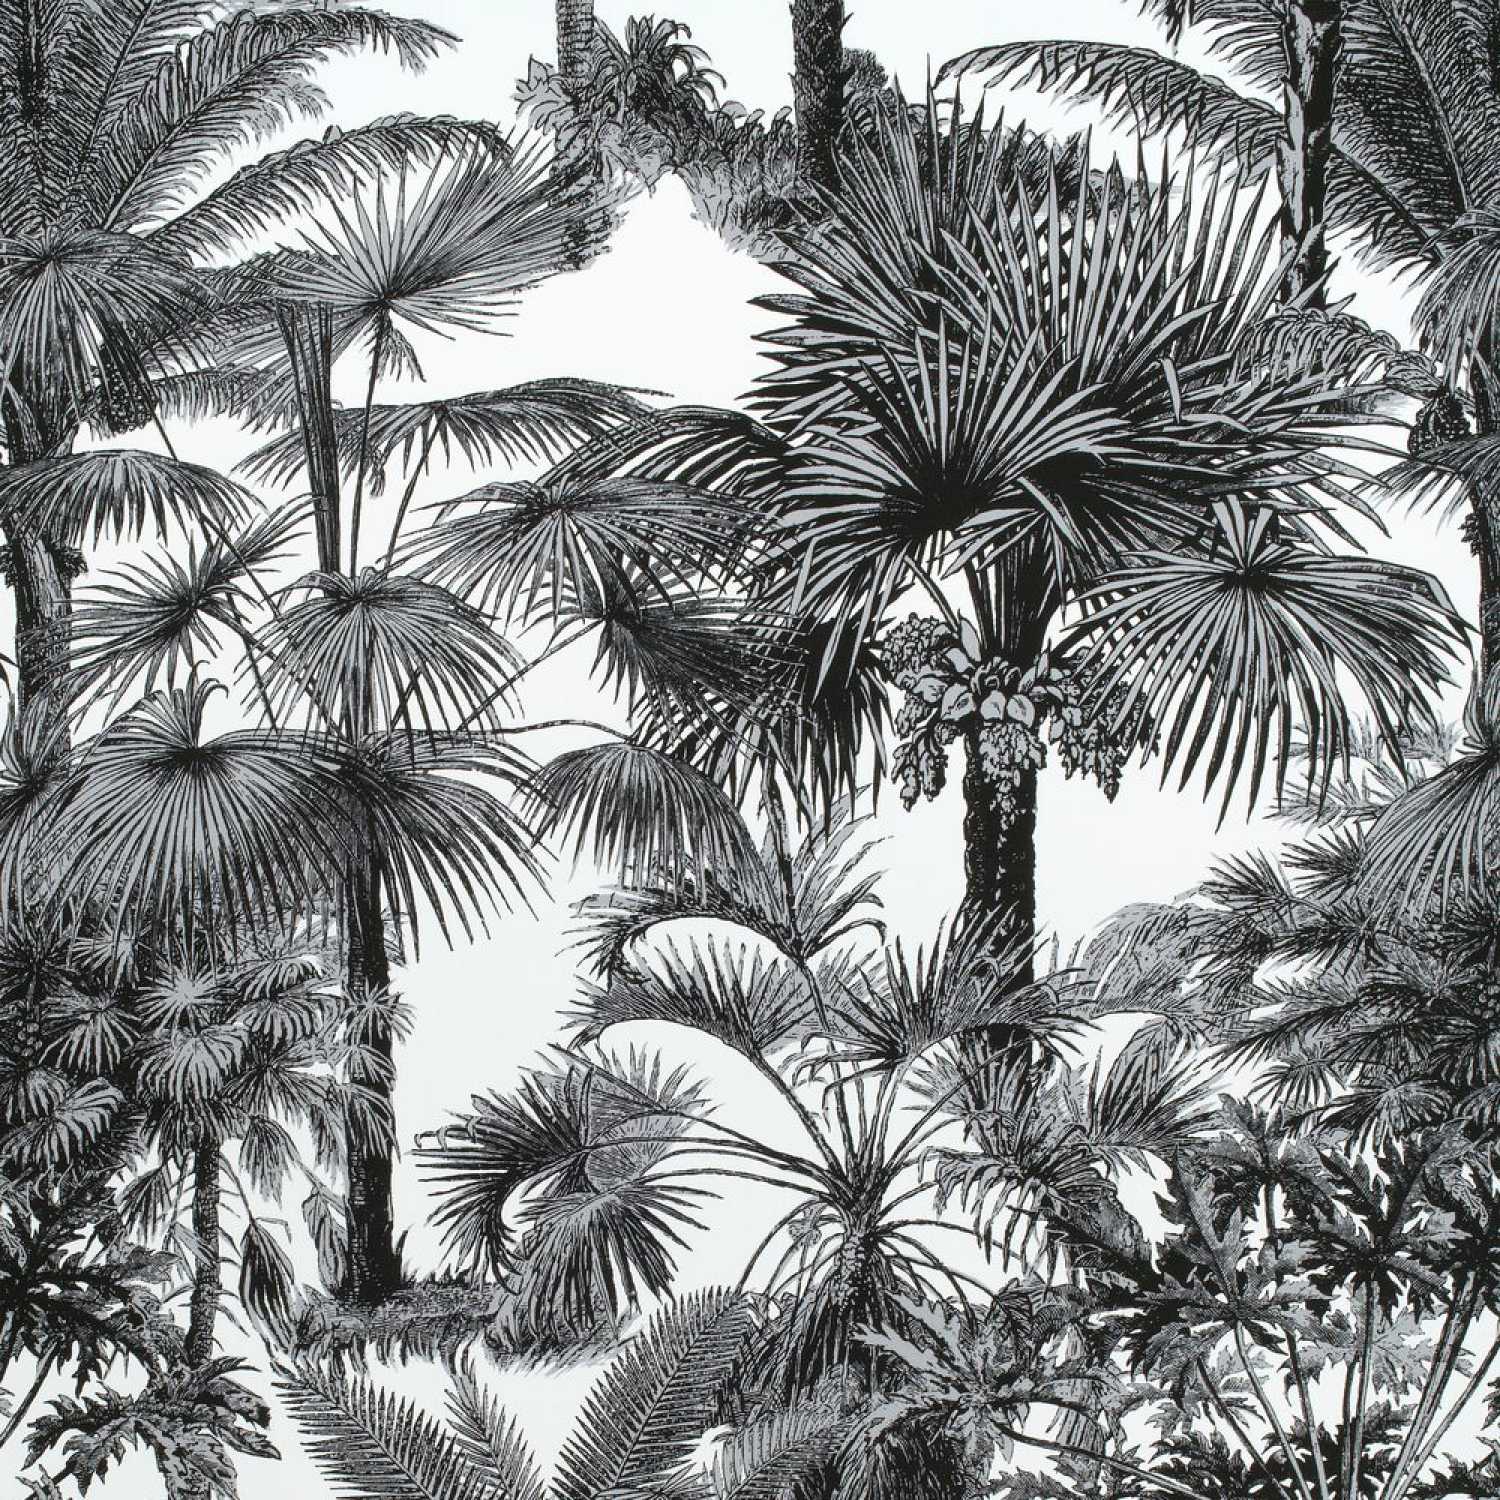 Black and White Fabric by the Yard Upholstery, Island Fan Palm Tree Leaves  Caribbean Plants Jungle Foliage Ocean Beach, Decorative Fabric for DIY and  Home Accents, Charcoal Grey by Ambesonne 